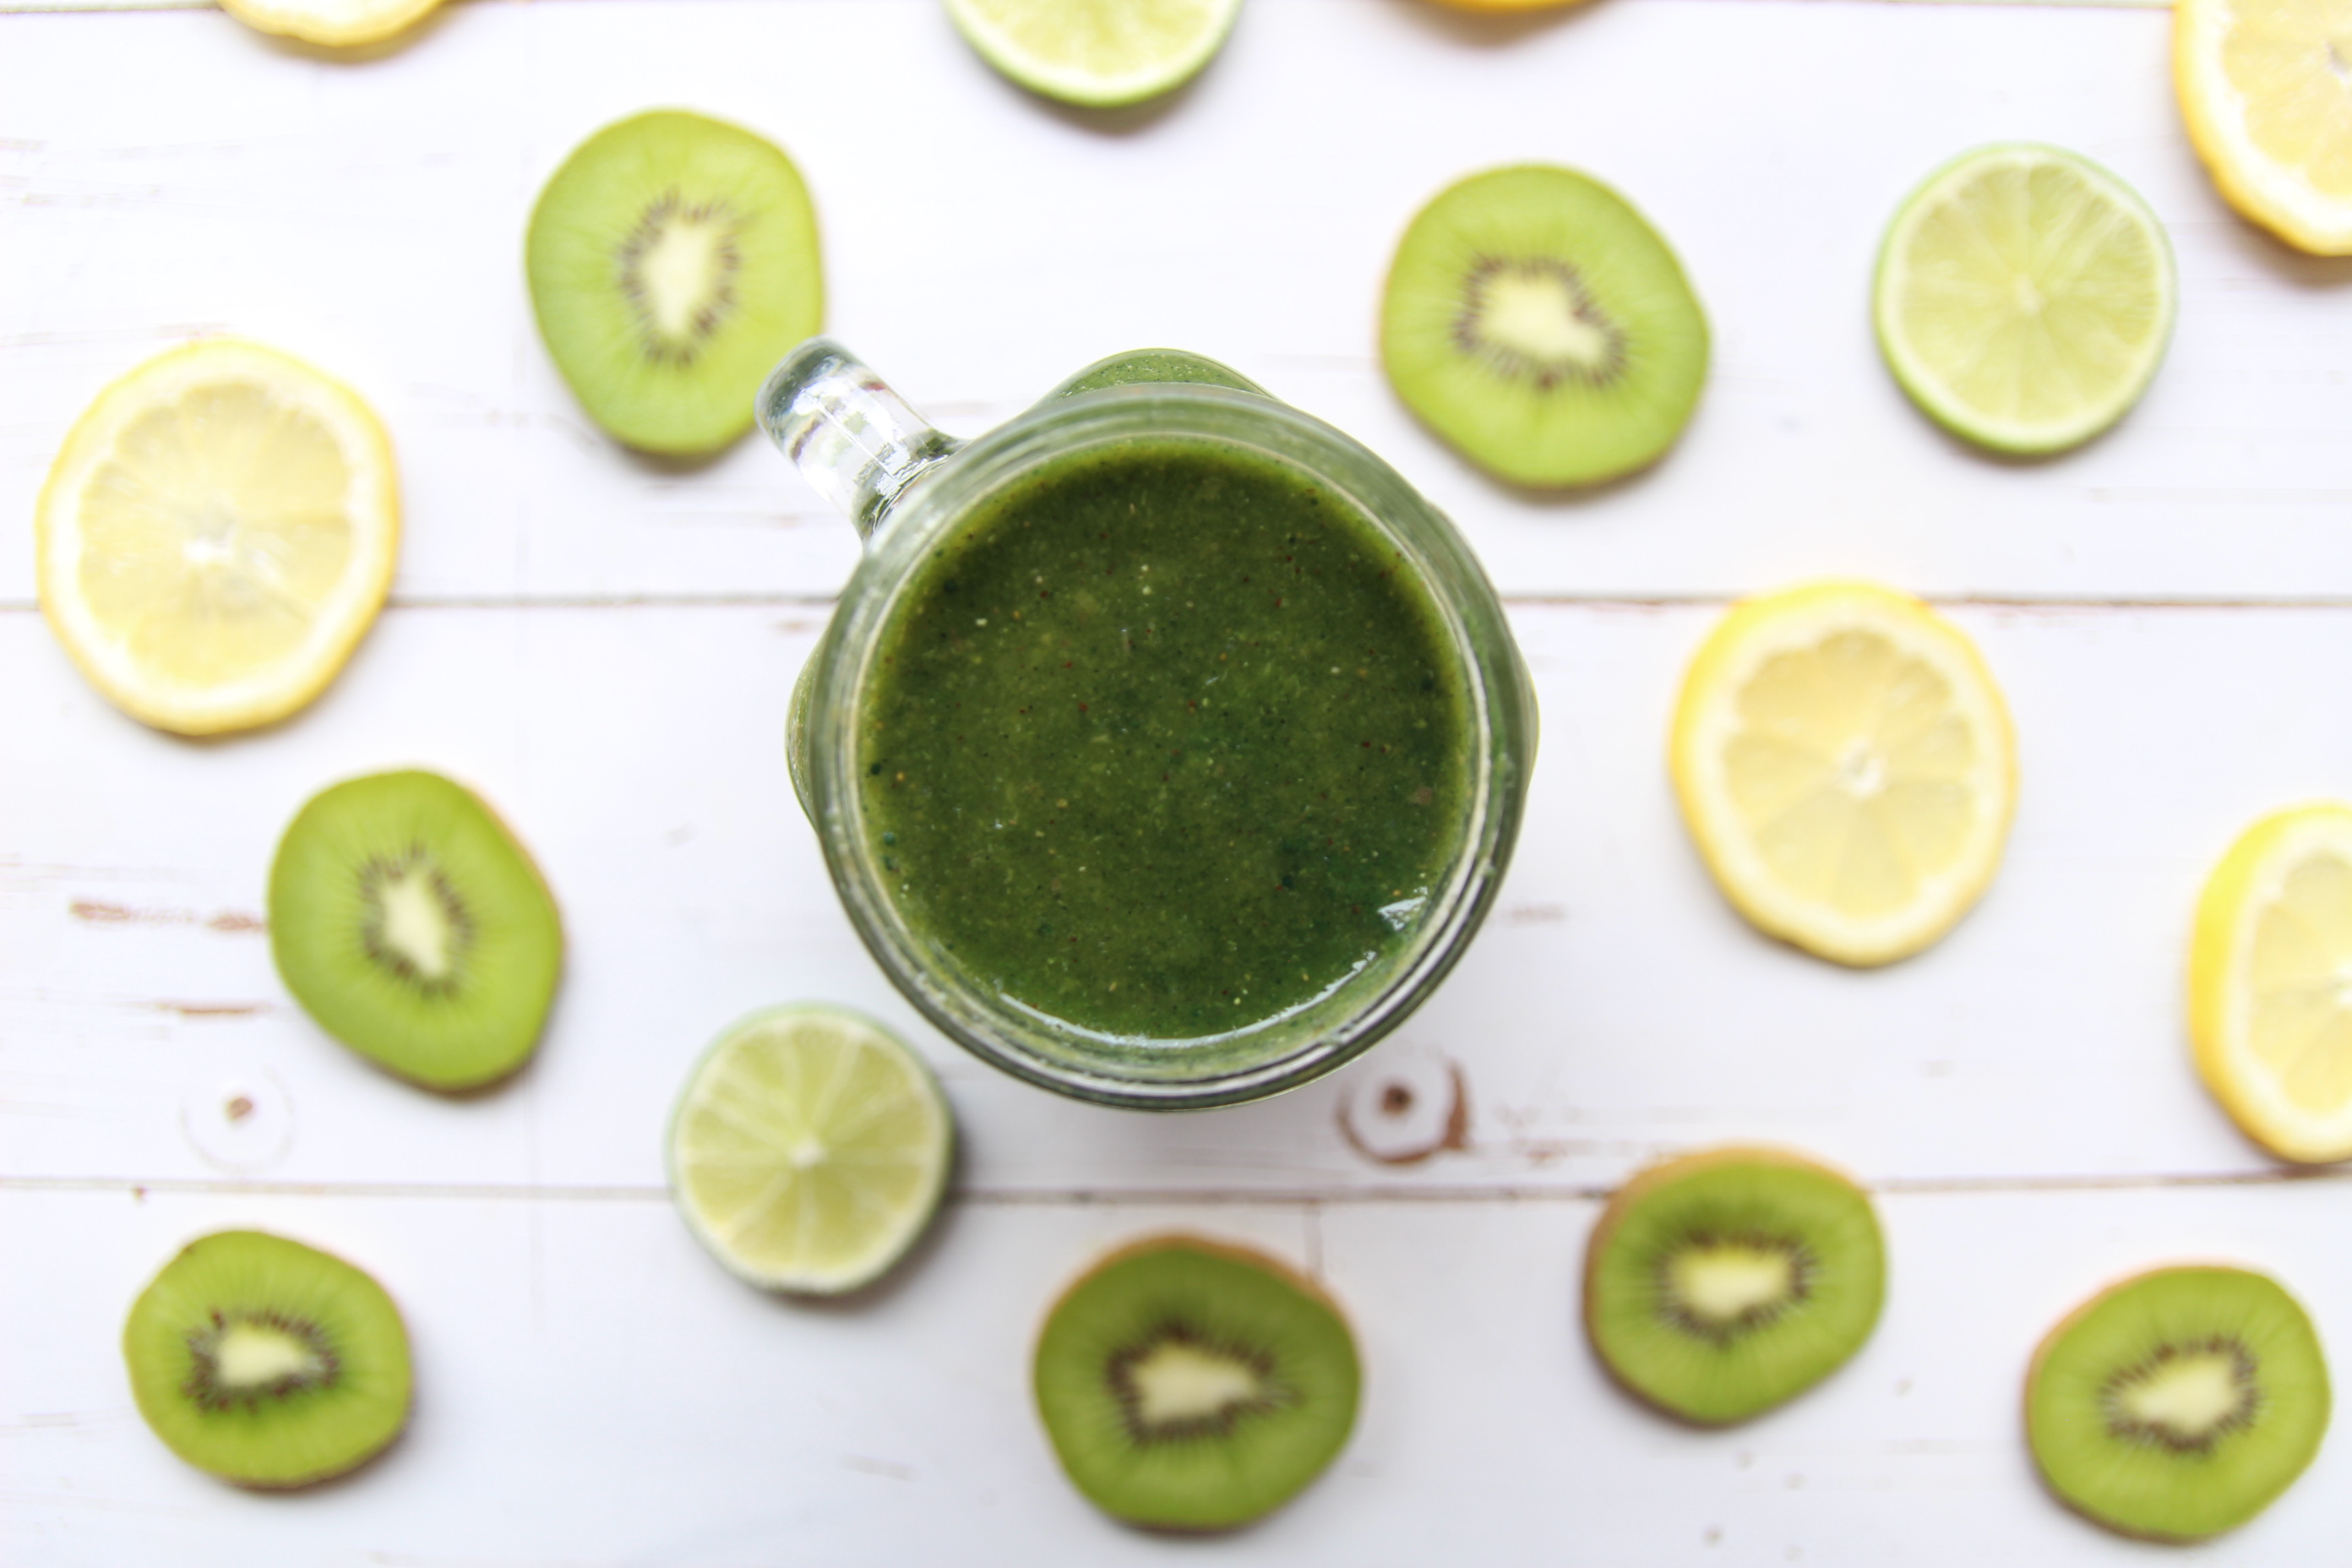 Why should you drink fresh green SMOOTHIES and JUICES?